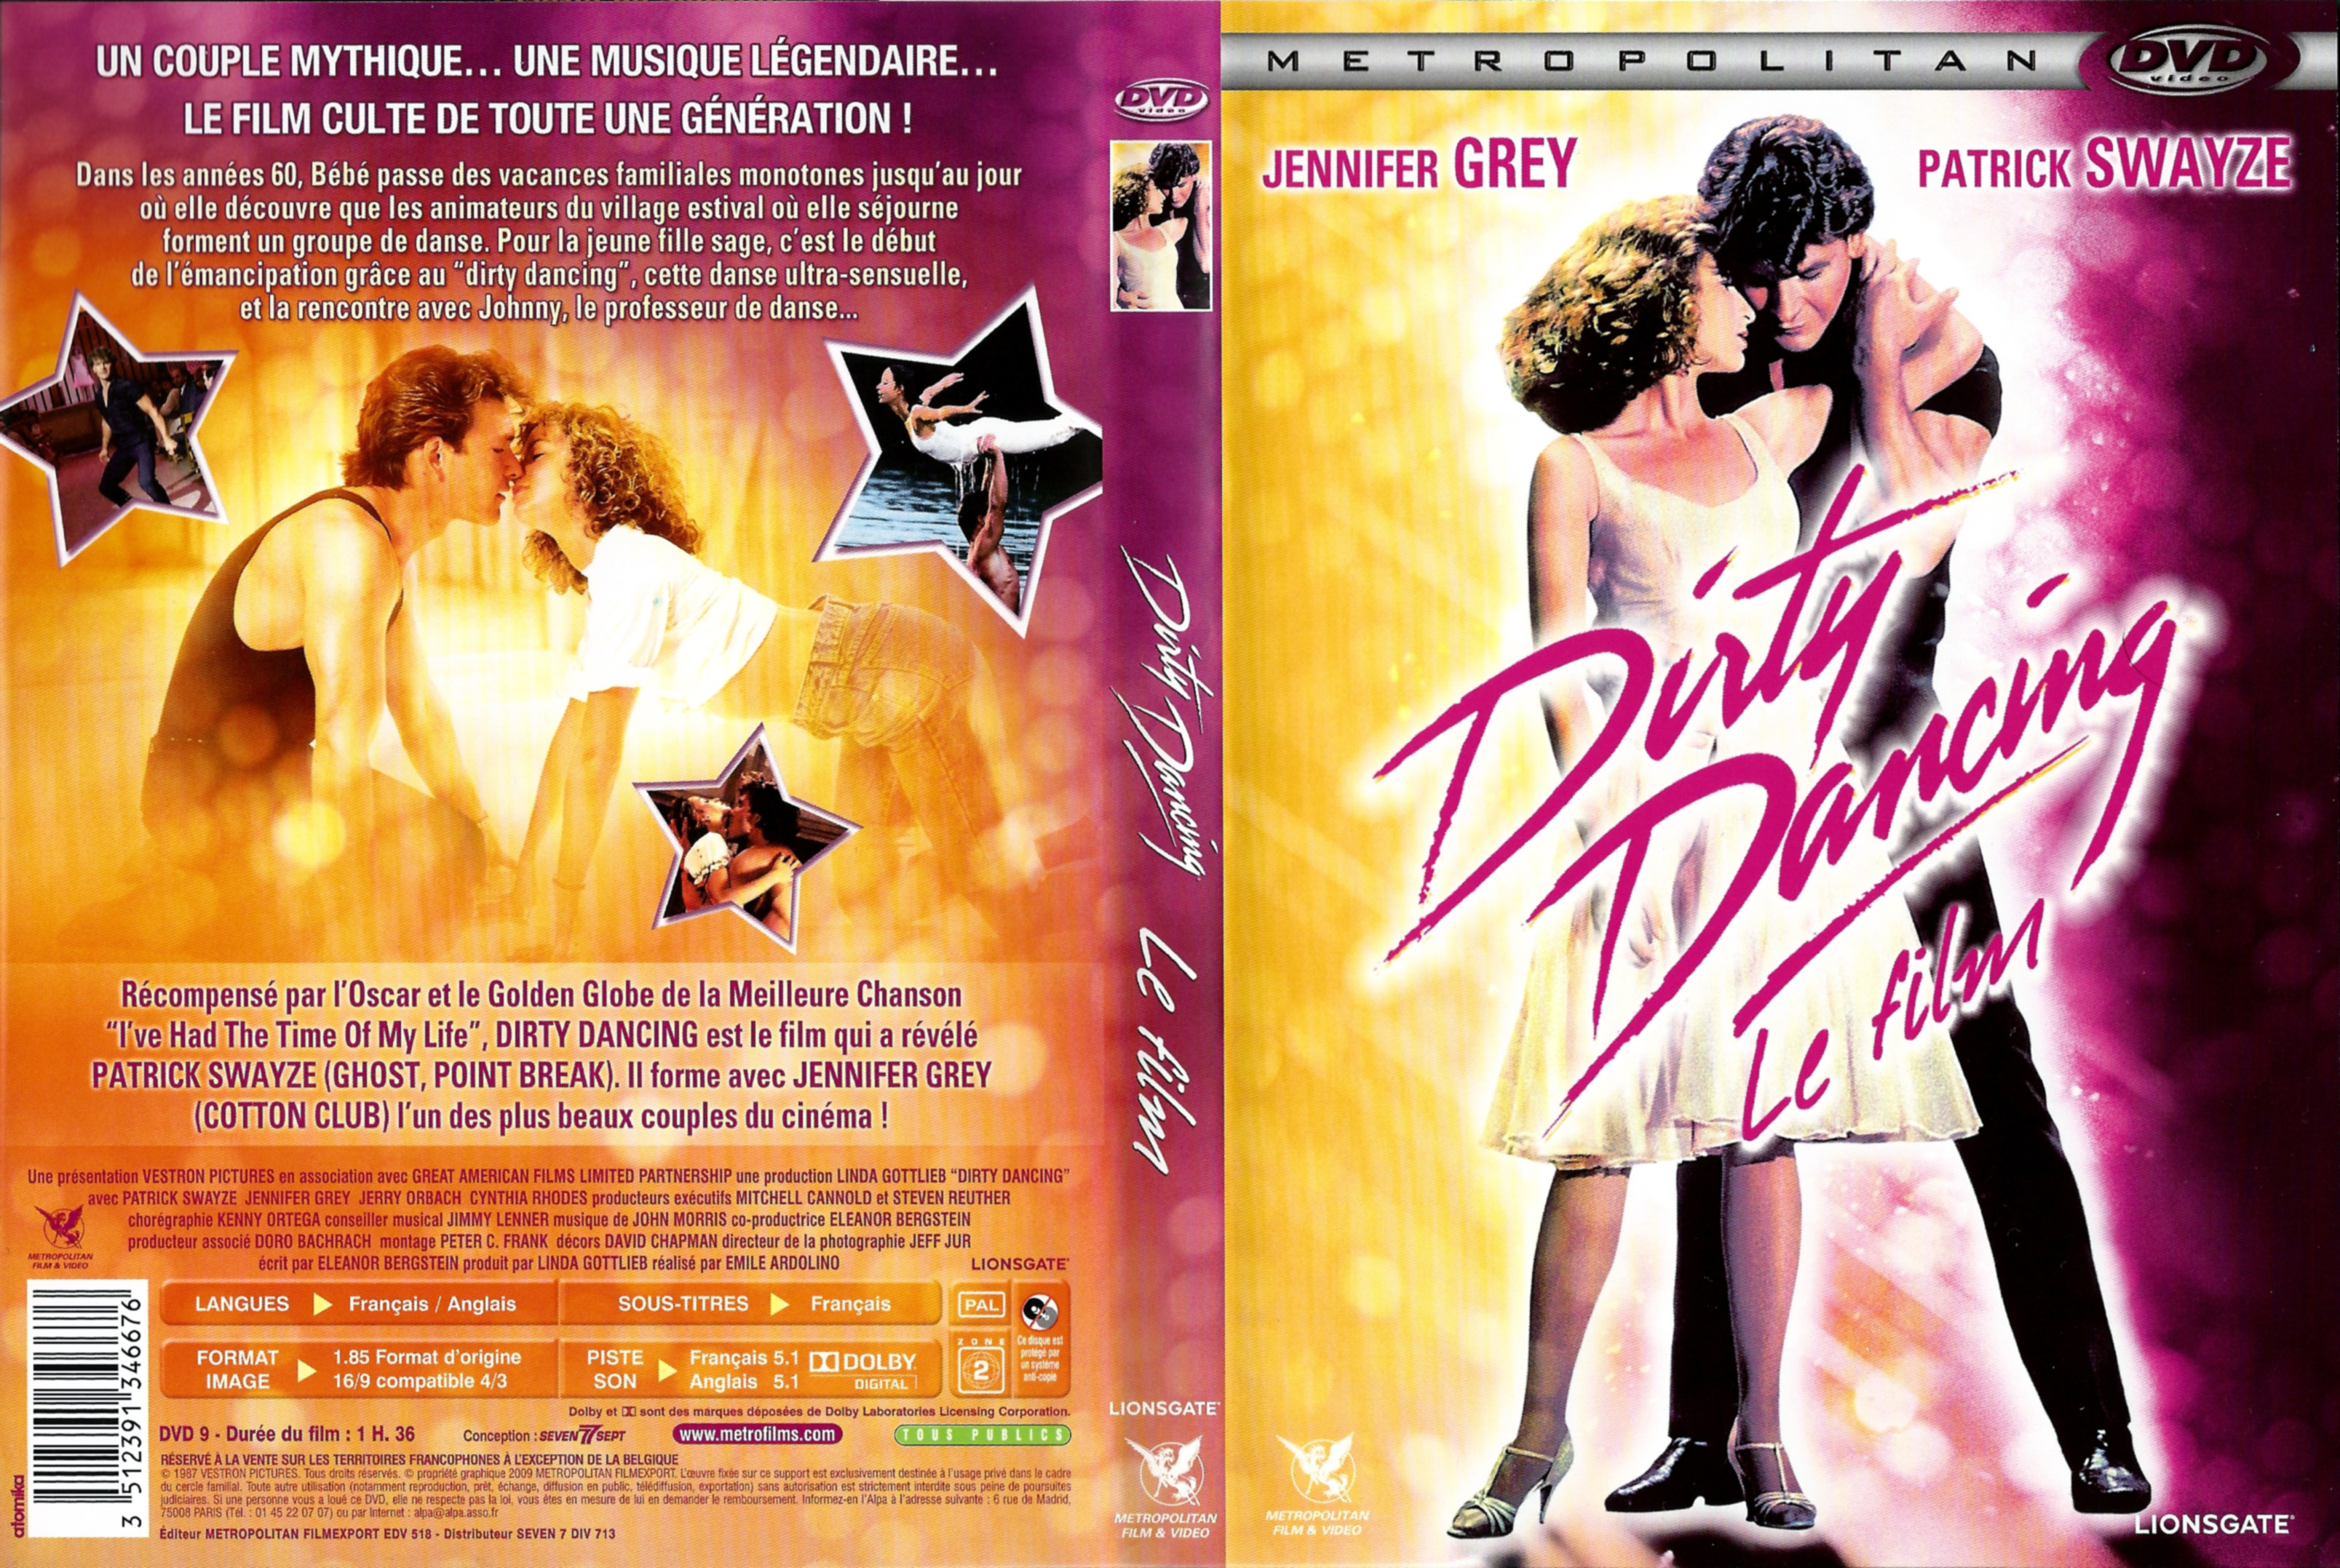 Jaquette DVD Dirty dancing v3